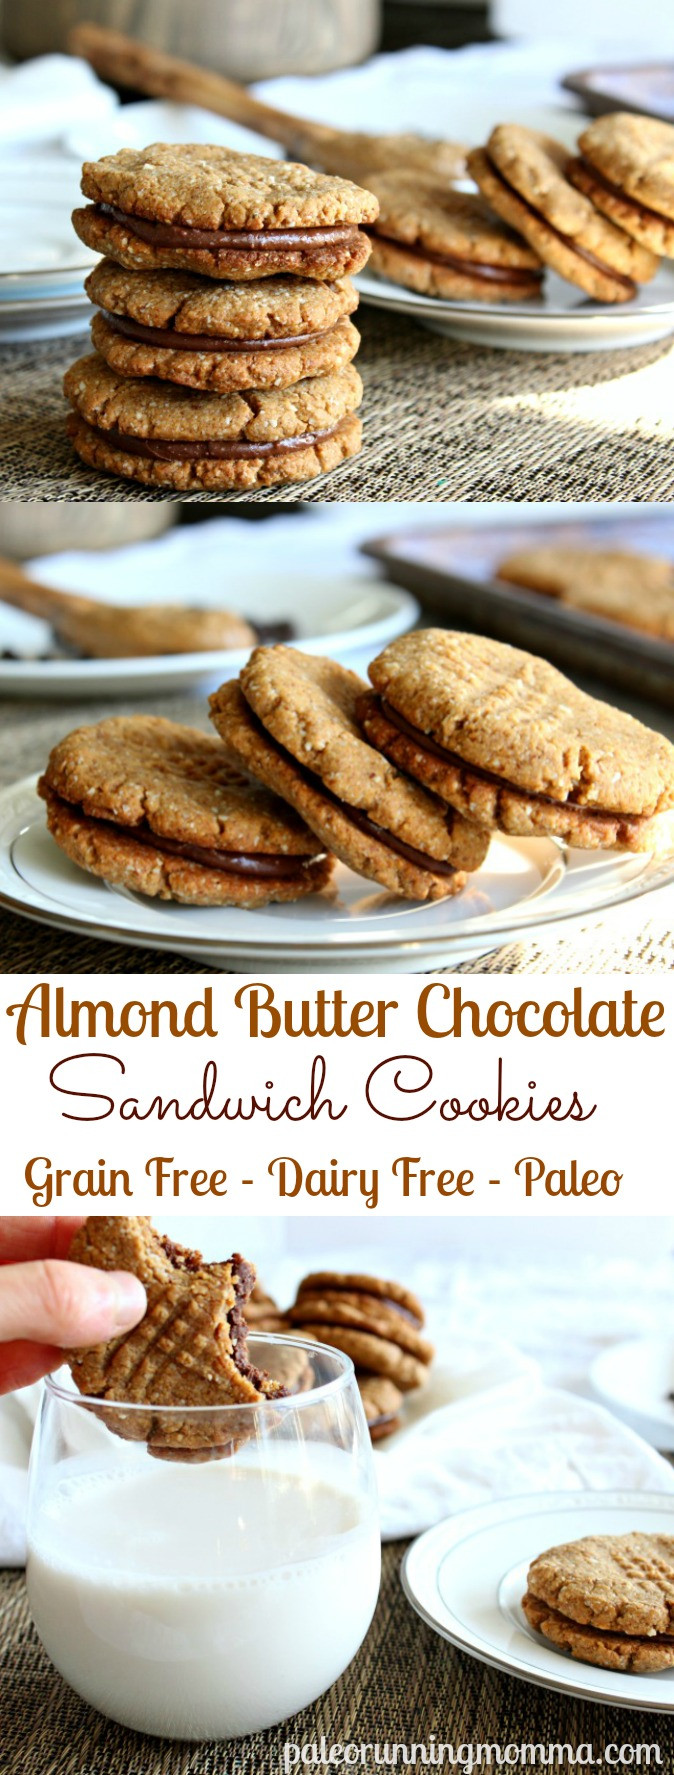 Paleo Almond Butter Cookies
 Chewy Chocolate Almond Butter Sandwich Cookies Paleo